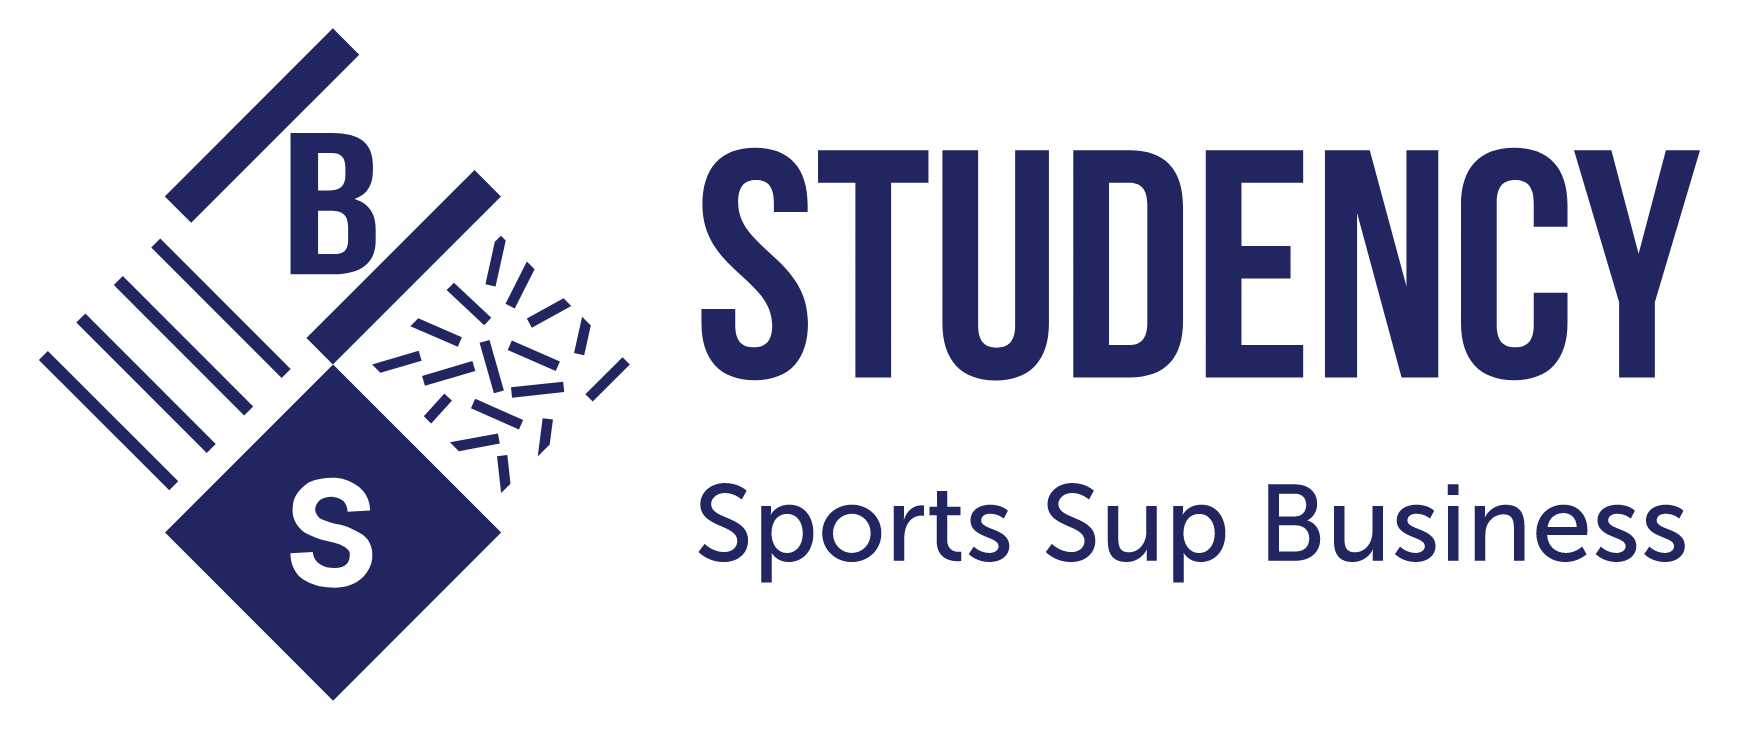 studency sports sup business